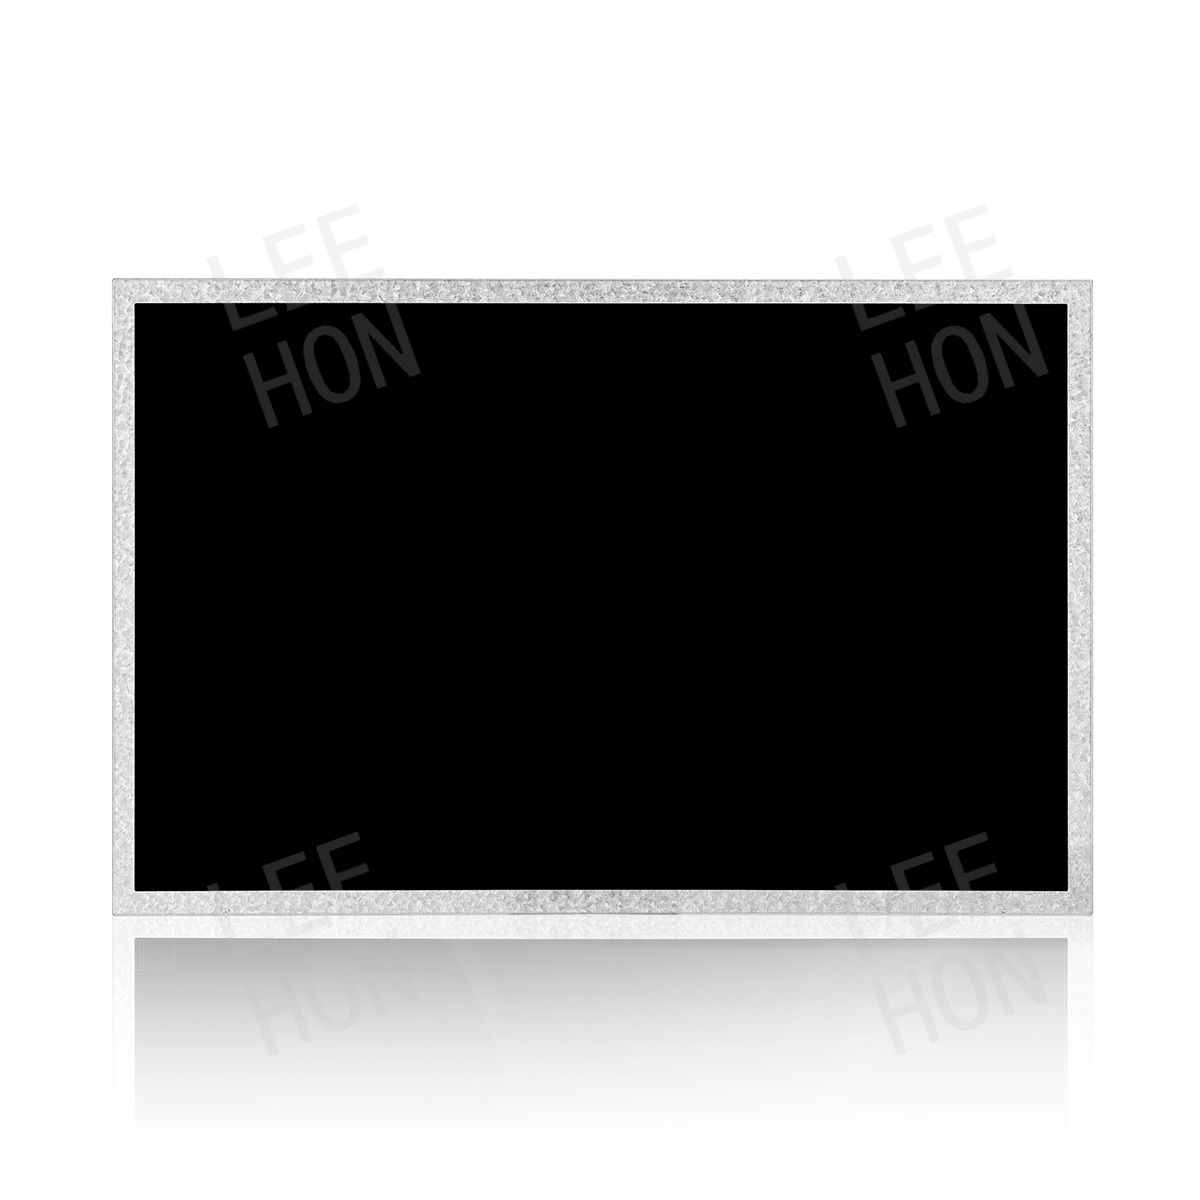 BOE 12.1 inch IPS LCD panel EV121WXM-N12 with resolution 1280*800 and LED driver